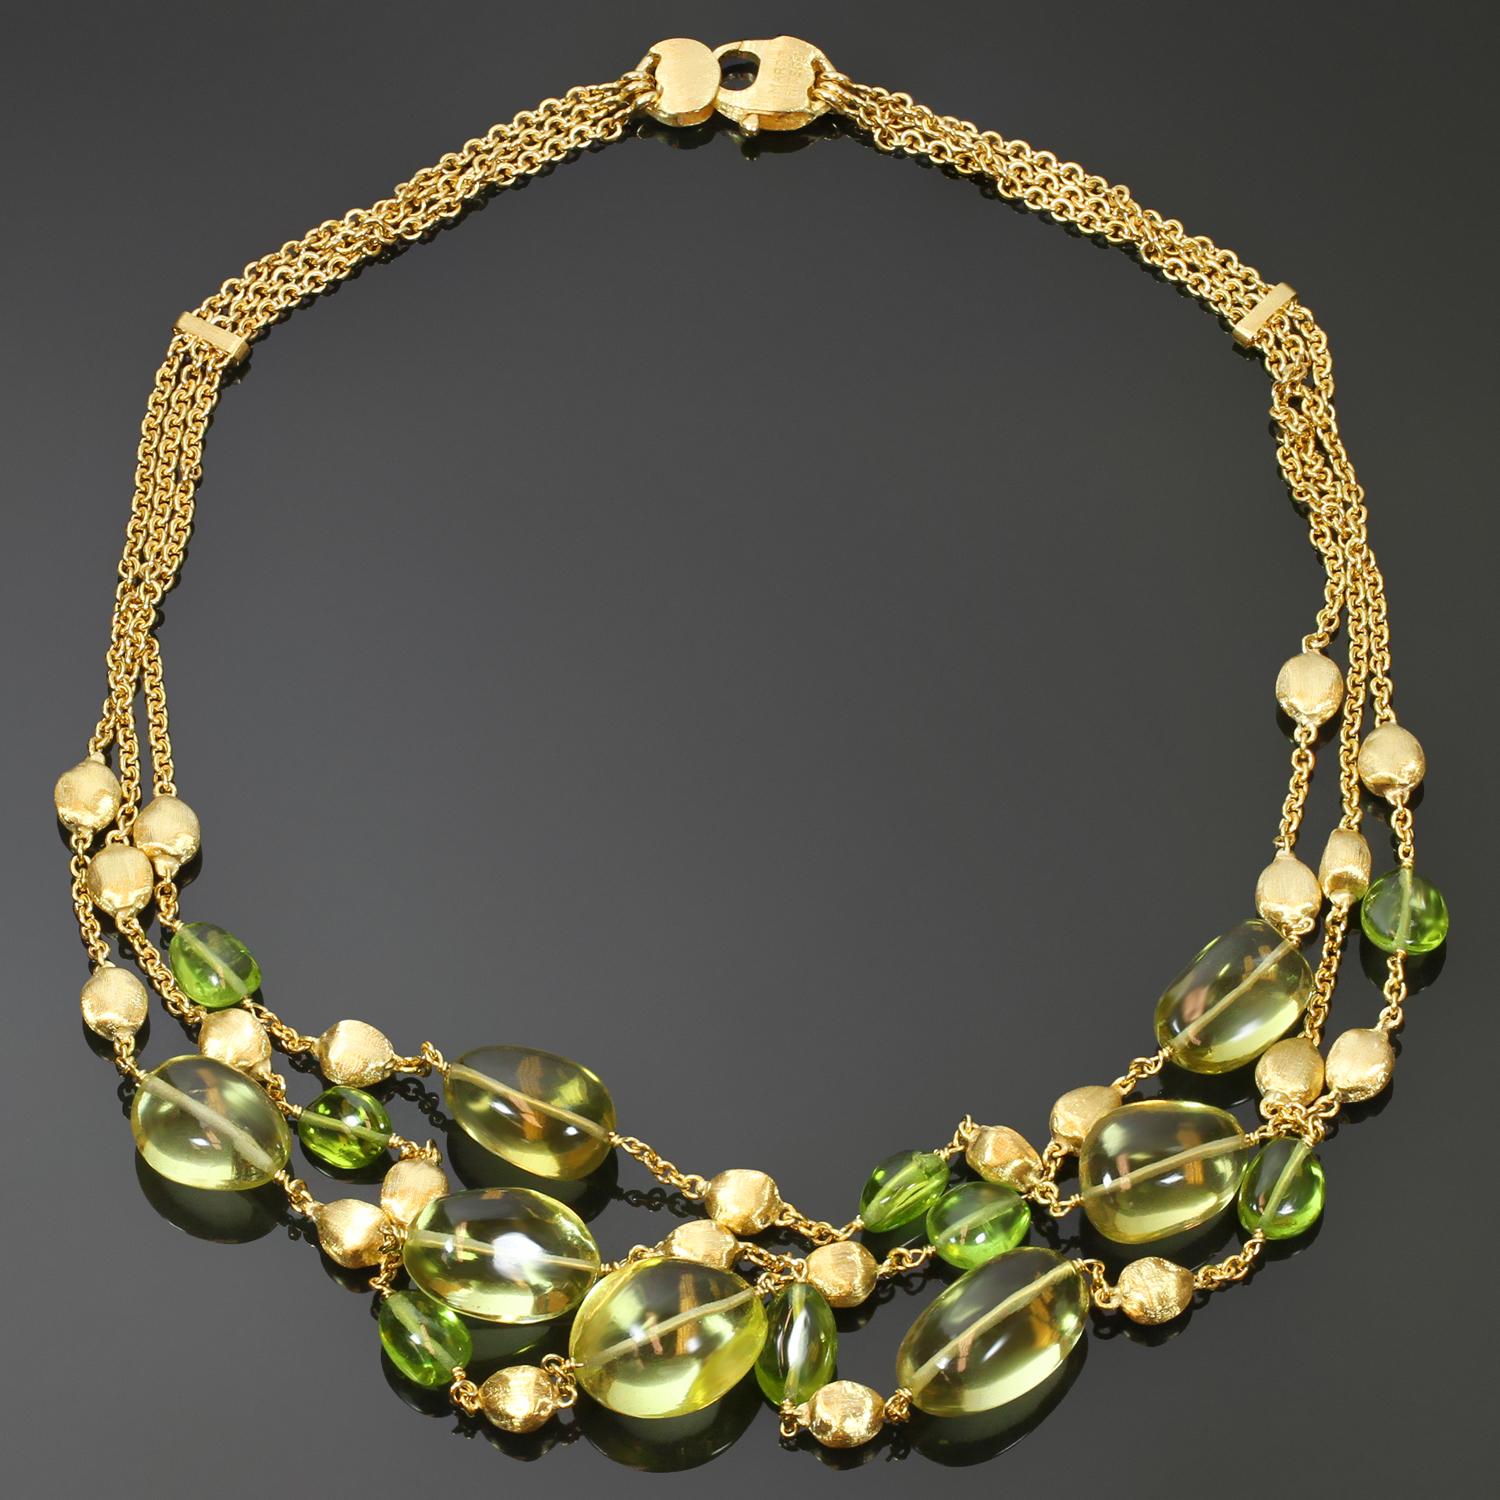 This fabulous multistand Marco Bicego necklace from the vibrant Confetti collection is crafted in 18k yellow gold and set with cabochon citrine and peridot stones. Made in Italy circa 2010s. Measurements: 16